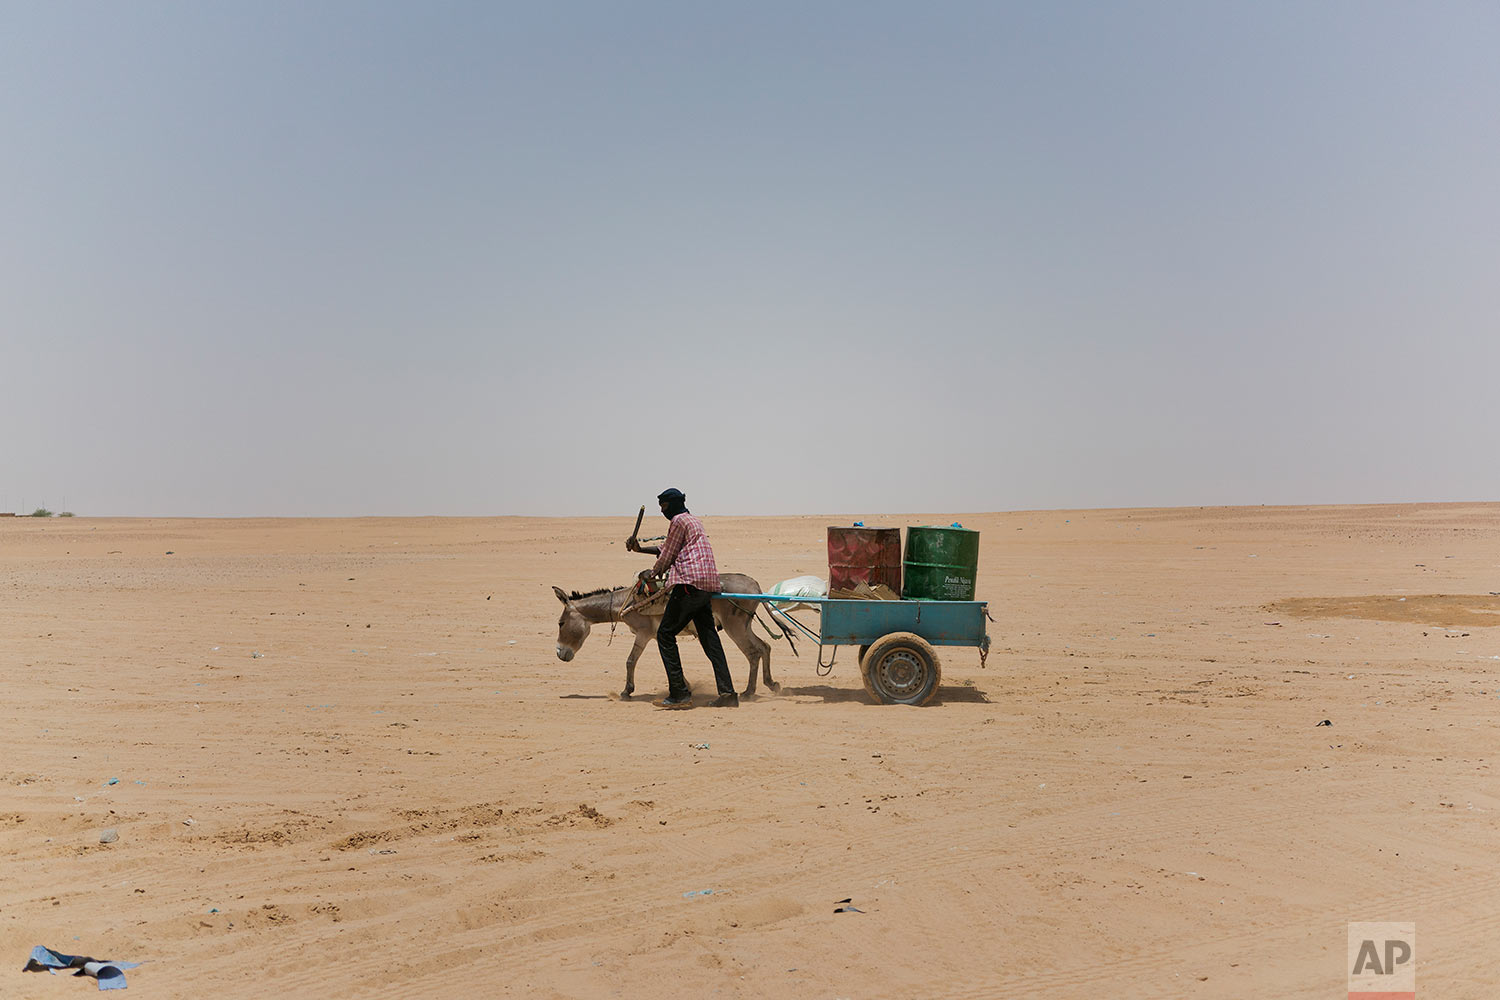  A man and his donkey transport water barrels toward the Algerian border in Niger's Tenere desert region of the south central Sahara on June 3, 2018. (AP Photo/Jerome Delay) 